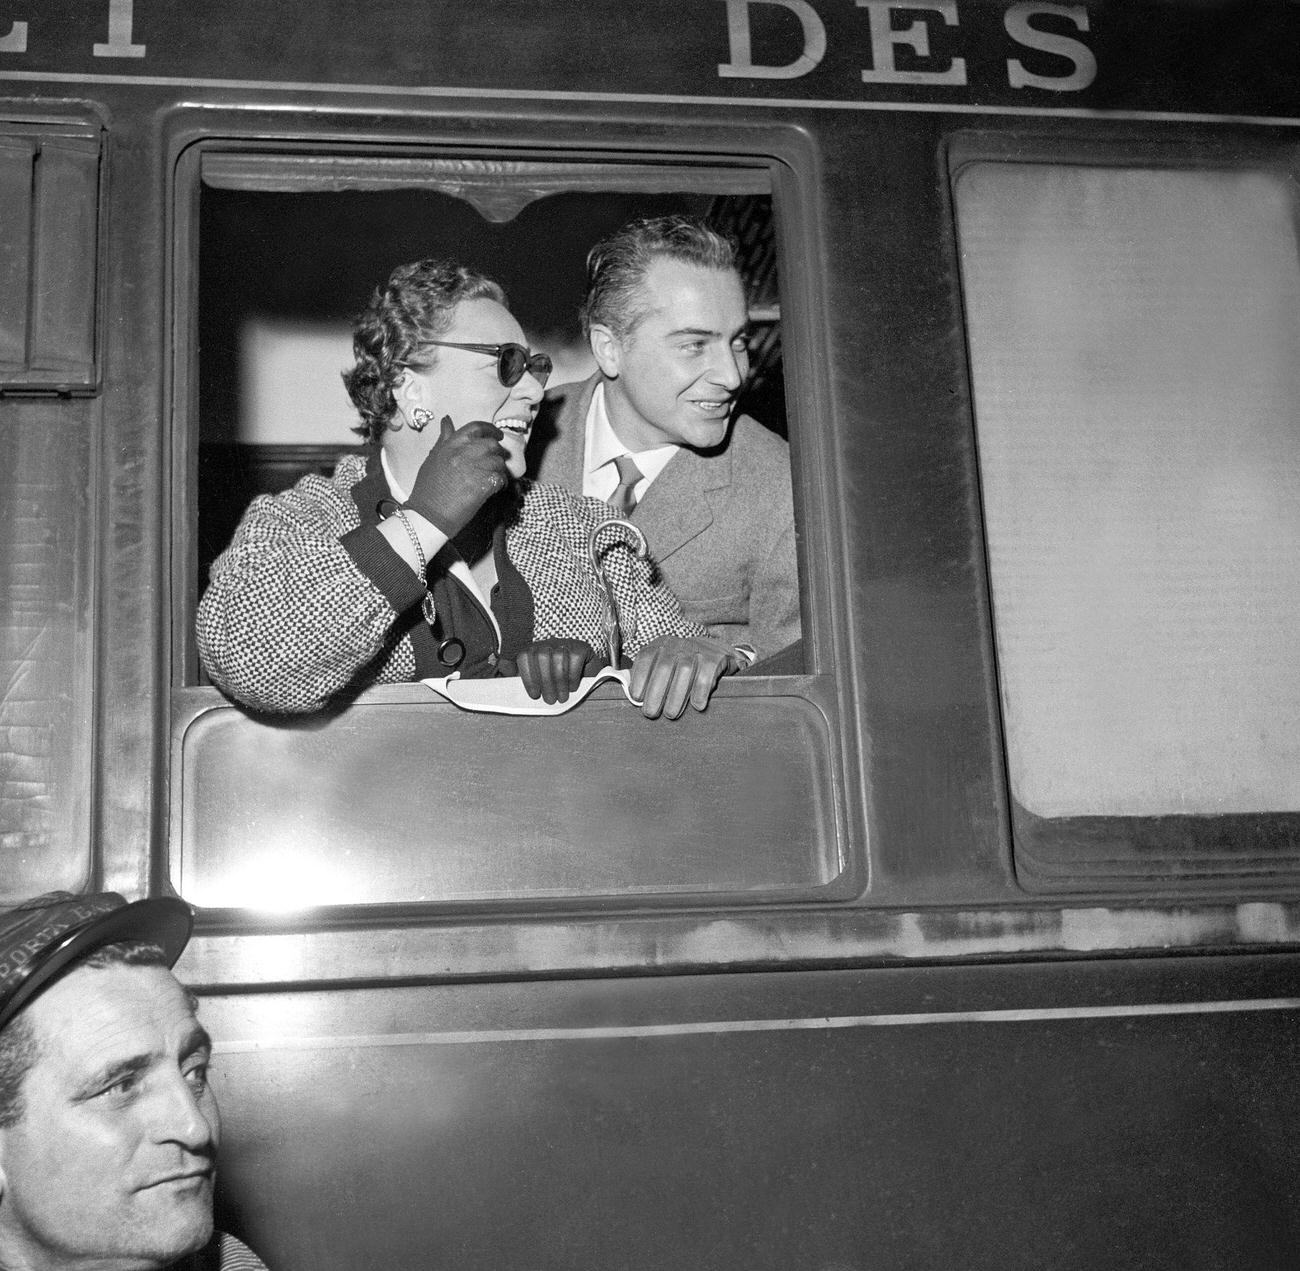 Italian actor Rossano Brazzi and his wife Lidia Bertolini appearing at their train window while coming back from Paris at Termini railway station. Rome, December 1955